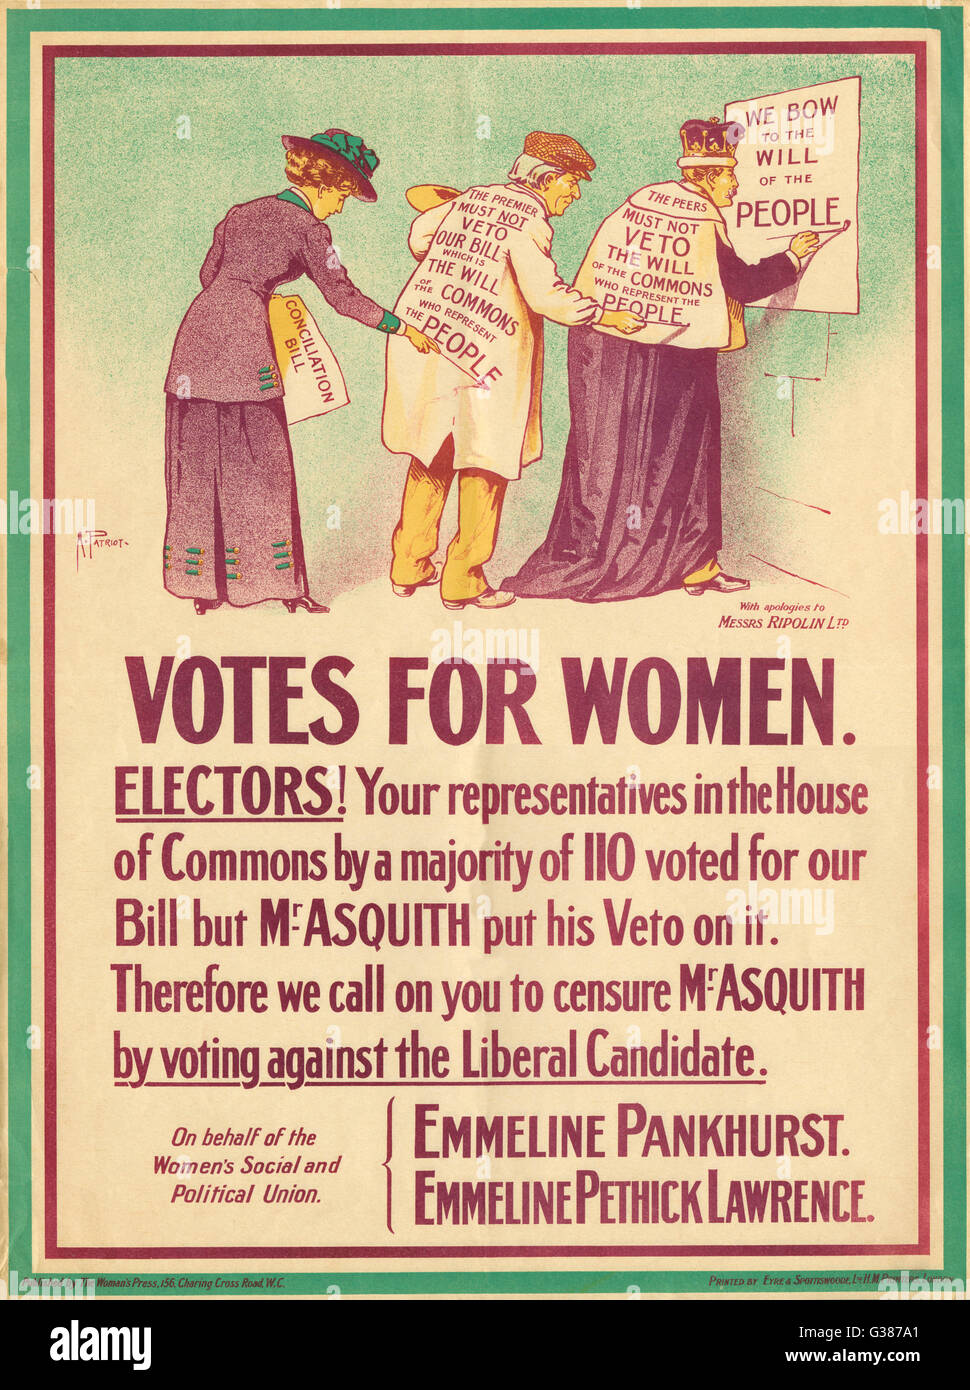 Paws off : Vintage political advert reproduction. poster Wall art poster